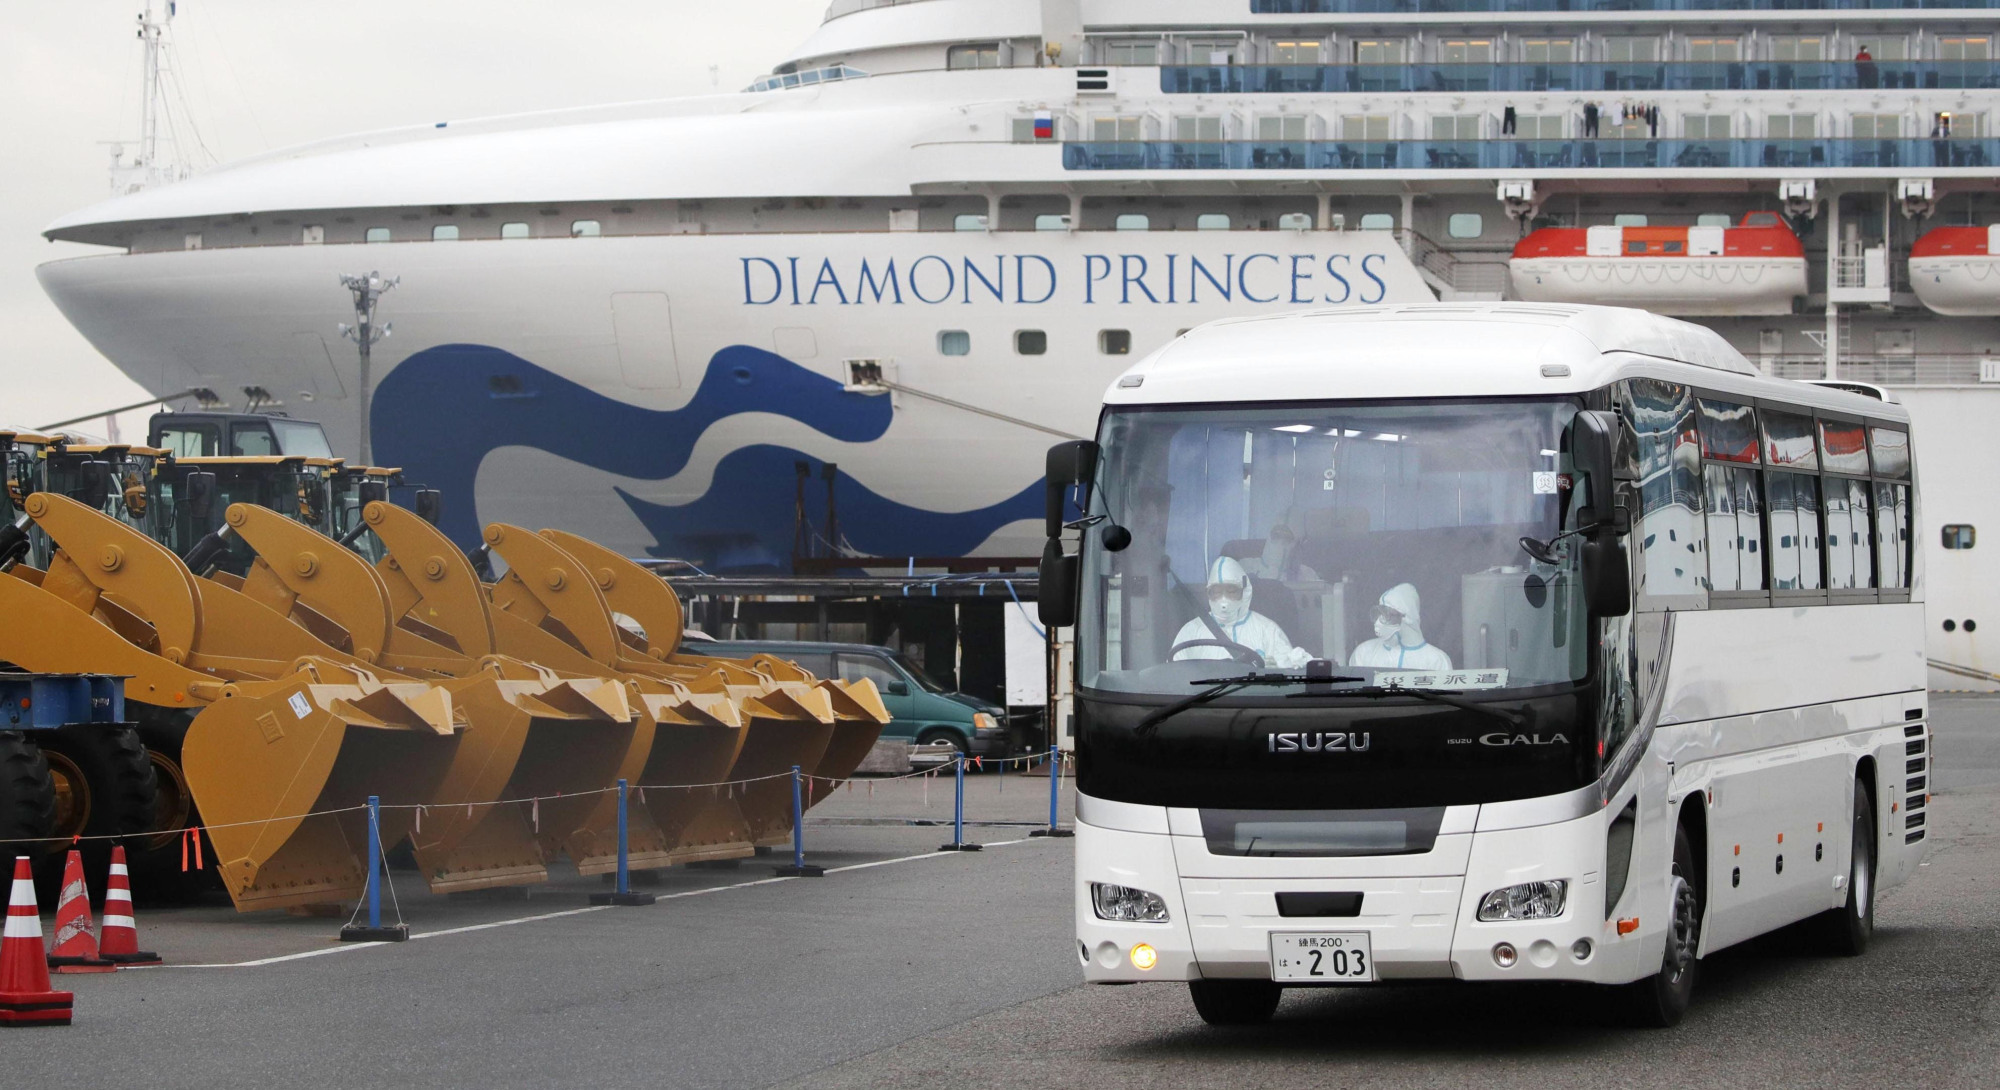 A driver wearing a protective suit is seen inside a bus carrying elderly passengers of the cruise ship Diamond Princess in Yokohama on Friday. | KYODO